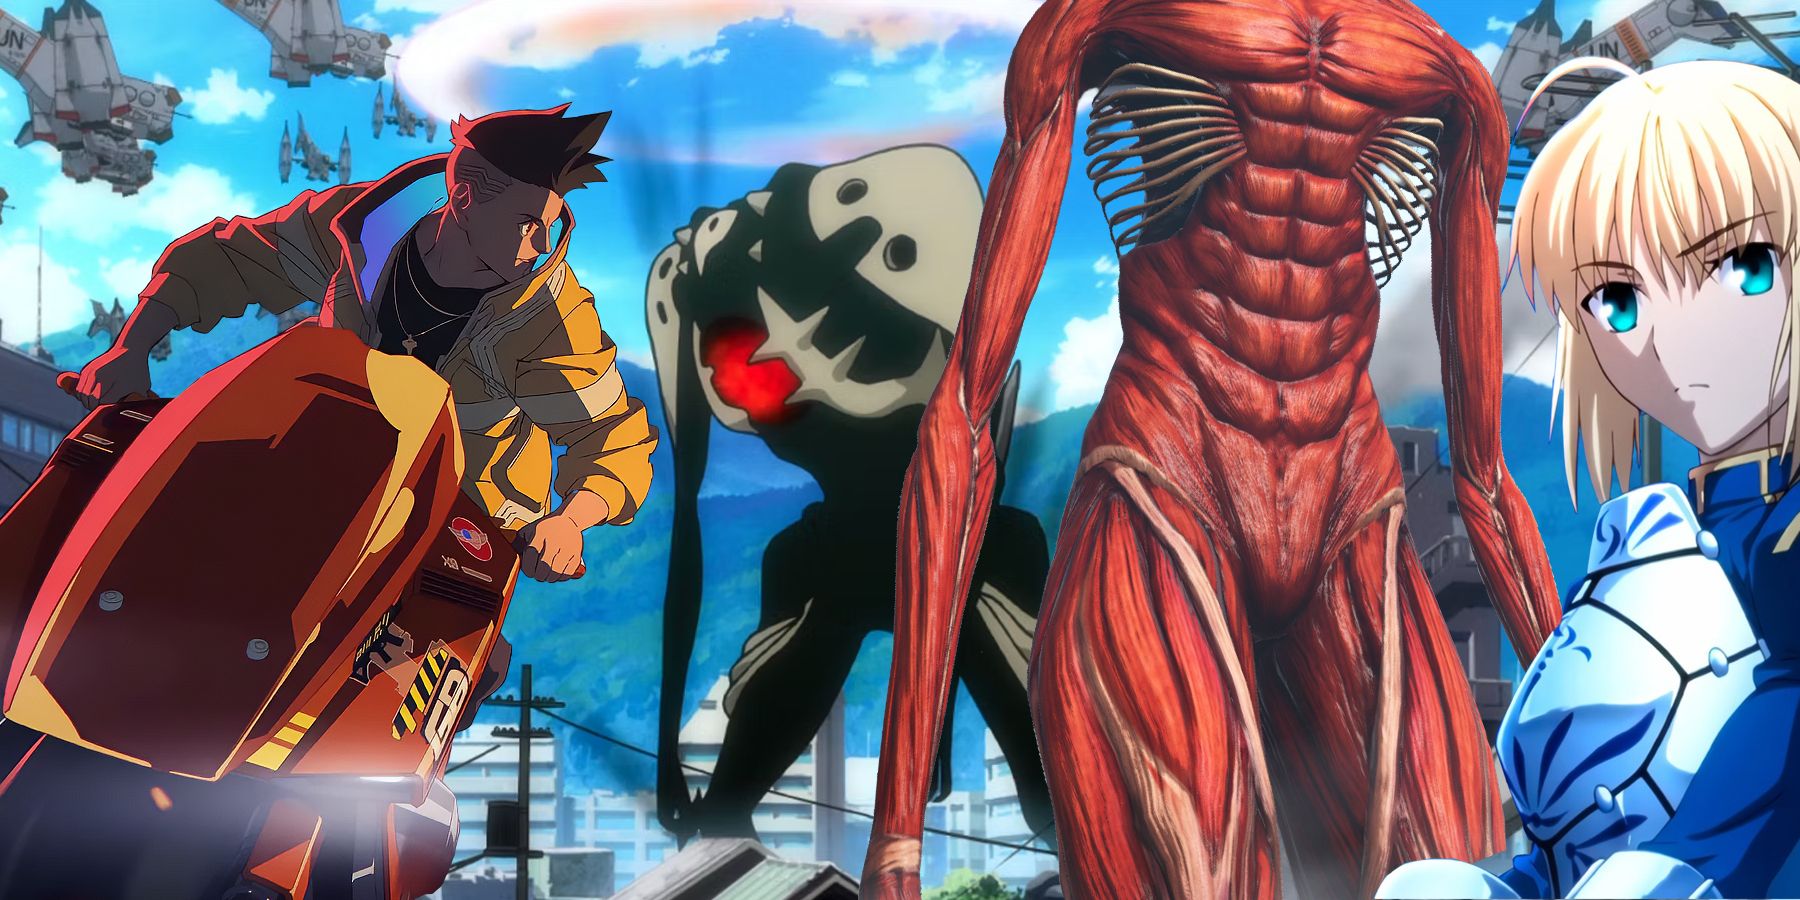 Action Anime's 5 Evilest Villains of All Time